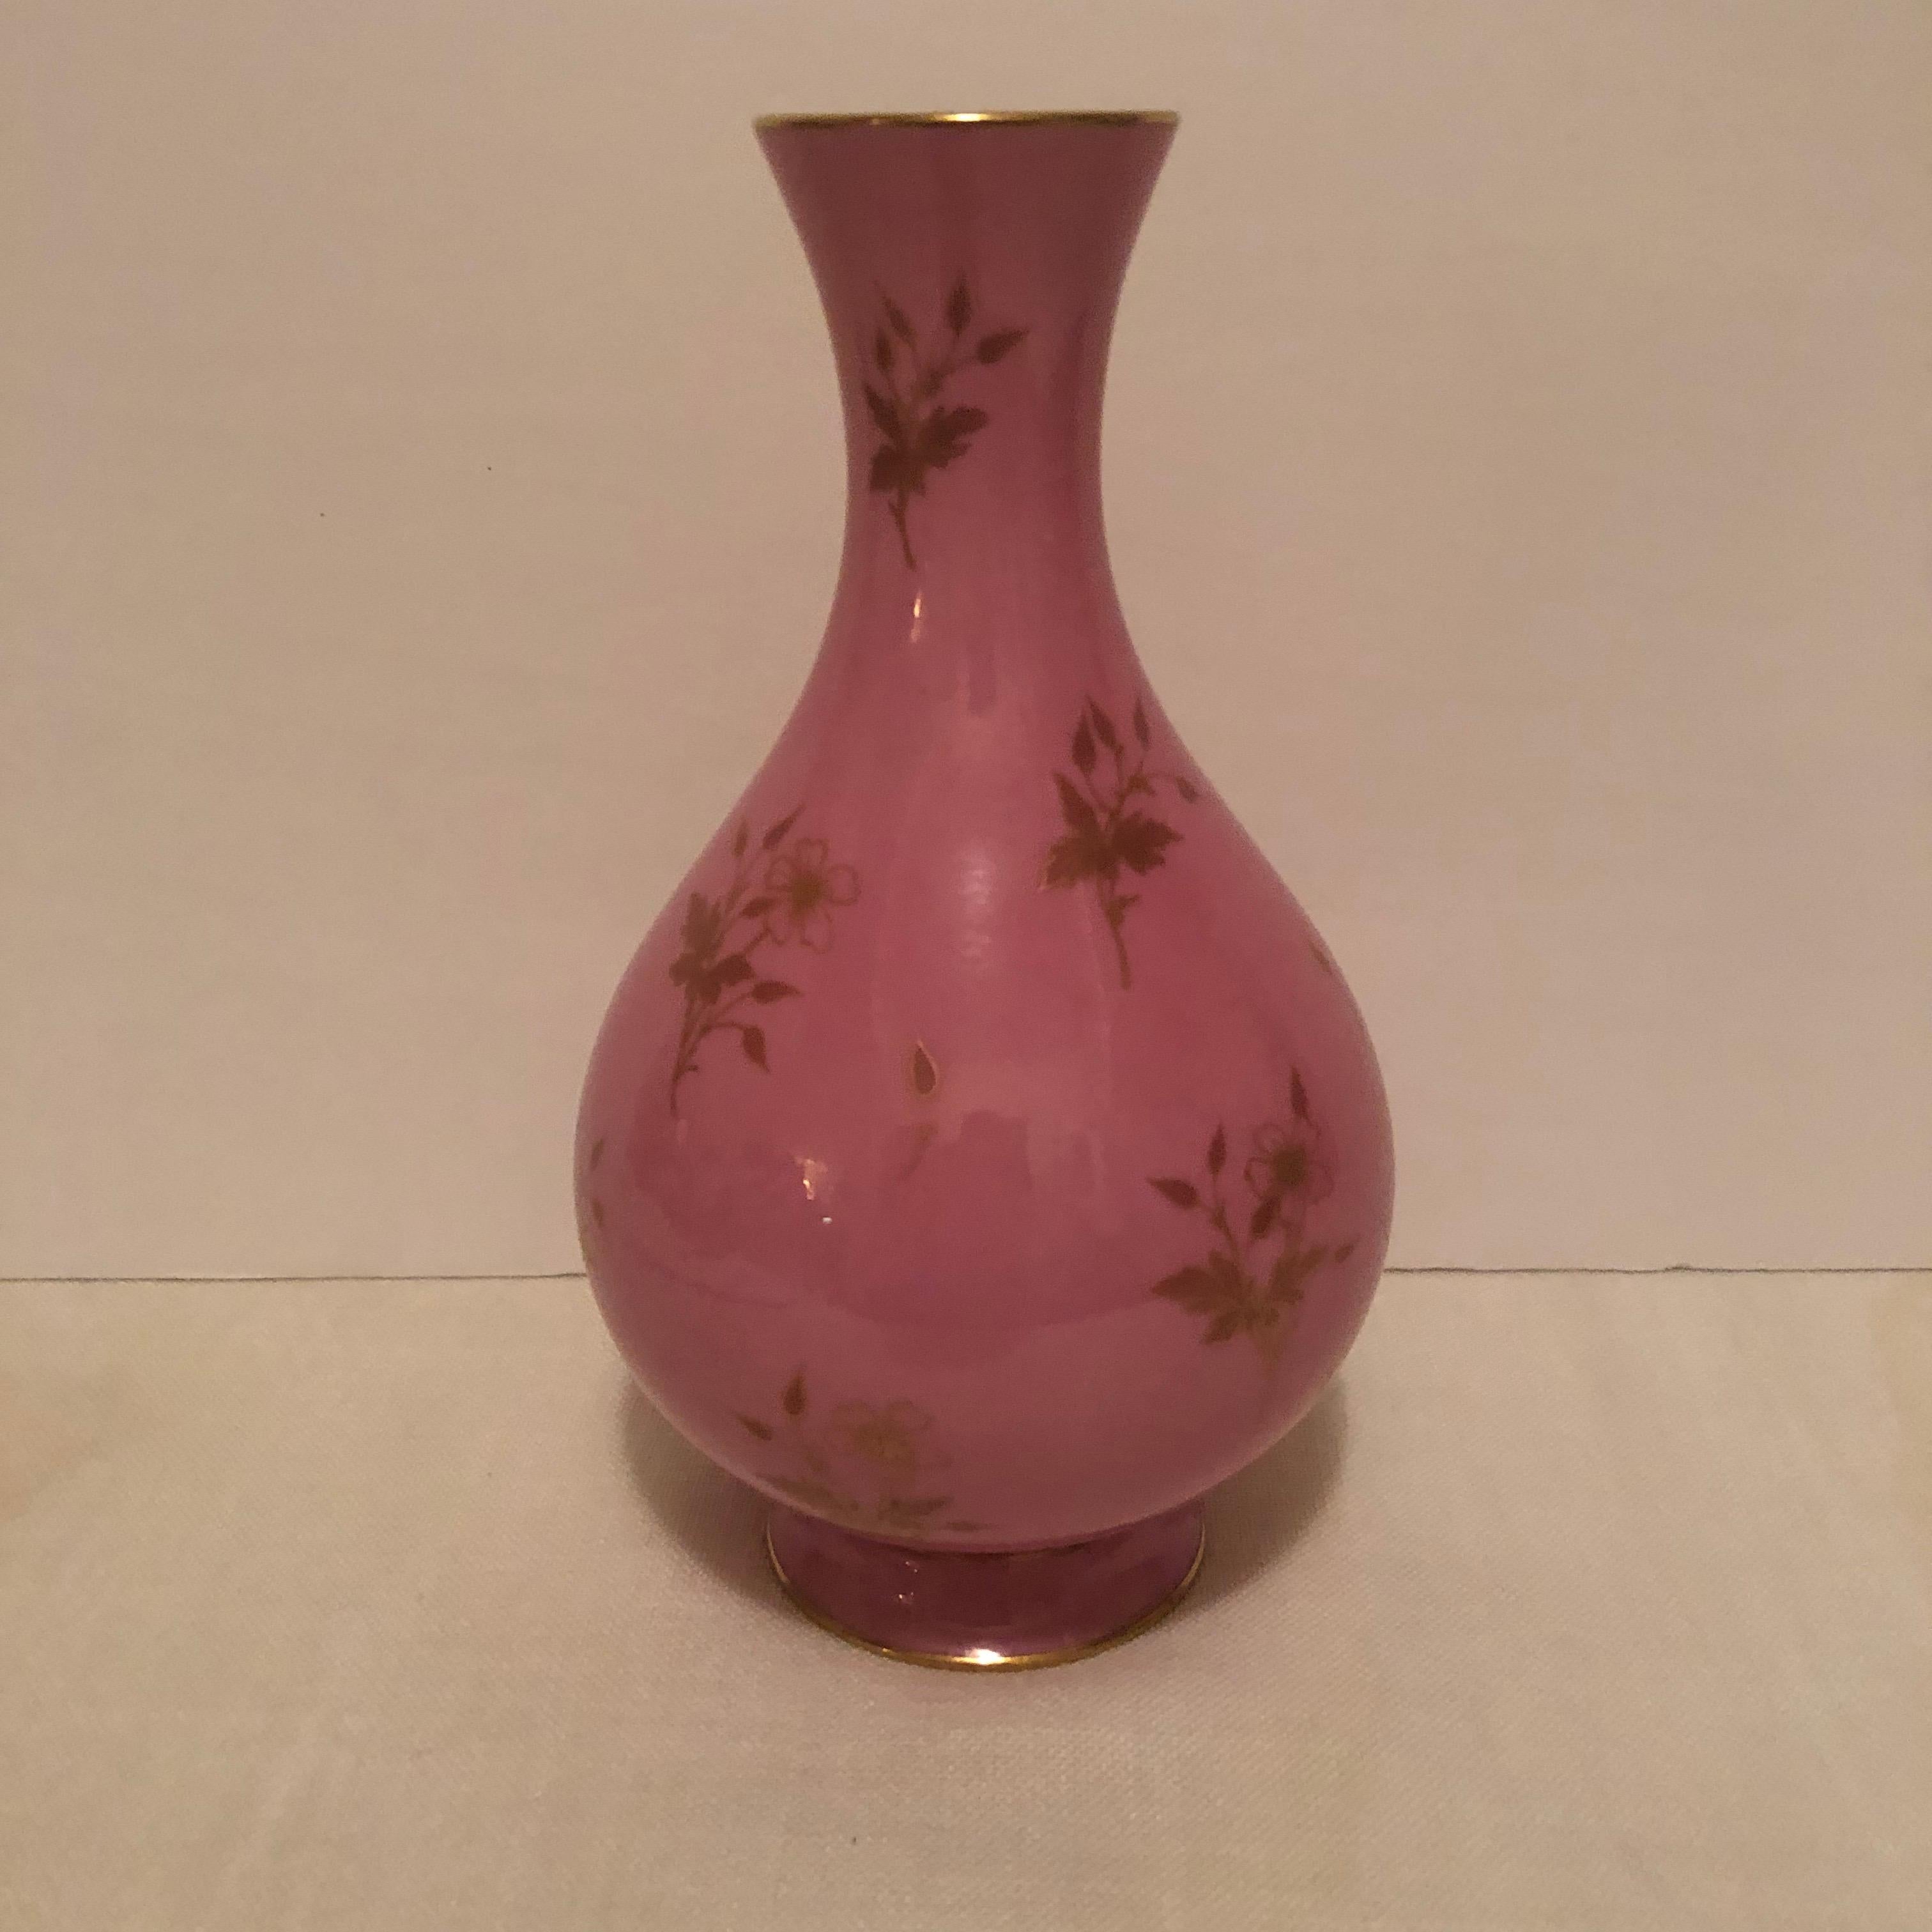 Rococo Sevres Vase in the Pink Pompadour Color Accented With Painted Gold Flowers